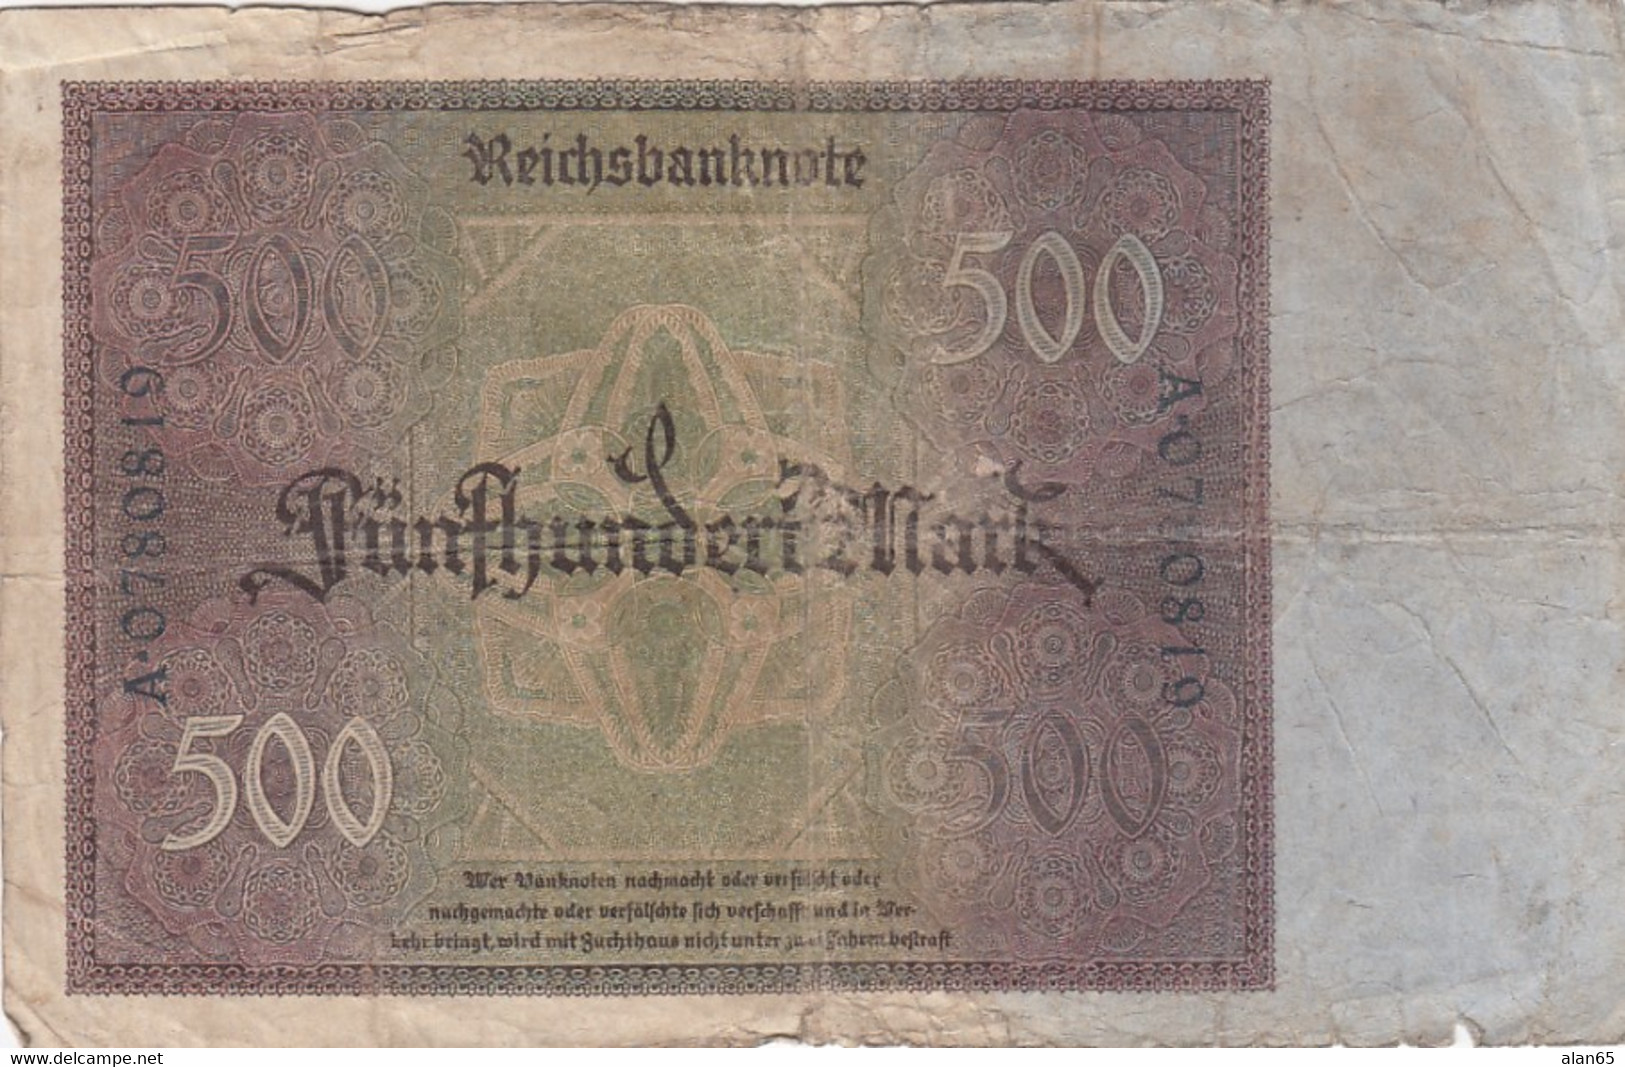 Germany #73, 500 Marks 27.3.1922 Reichsbanknote Banknote Currency - 500 Mark